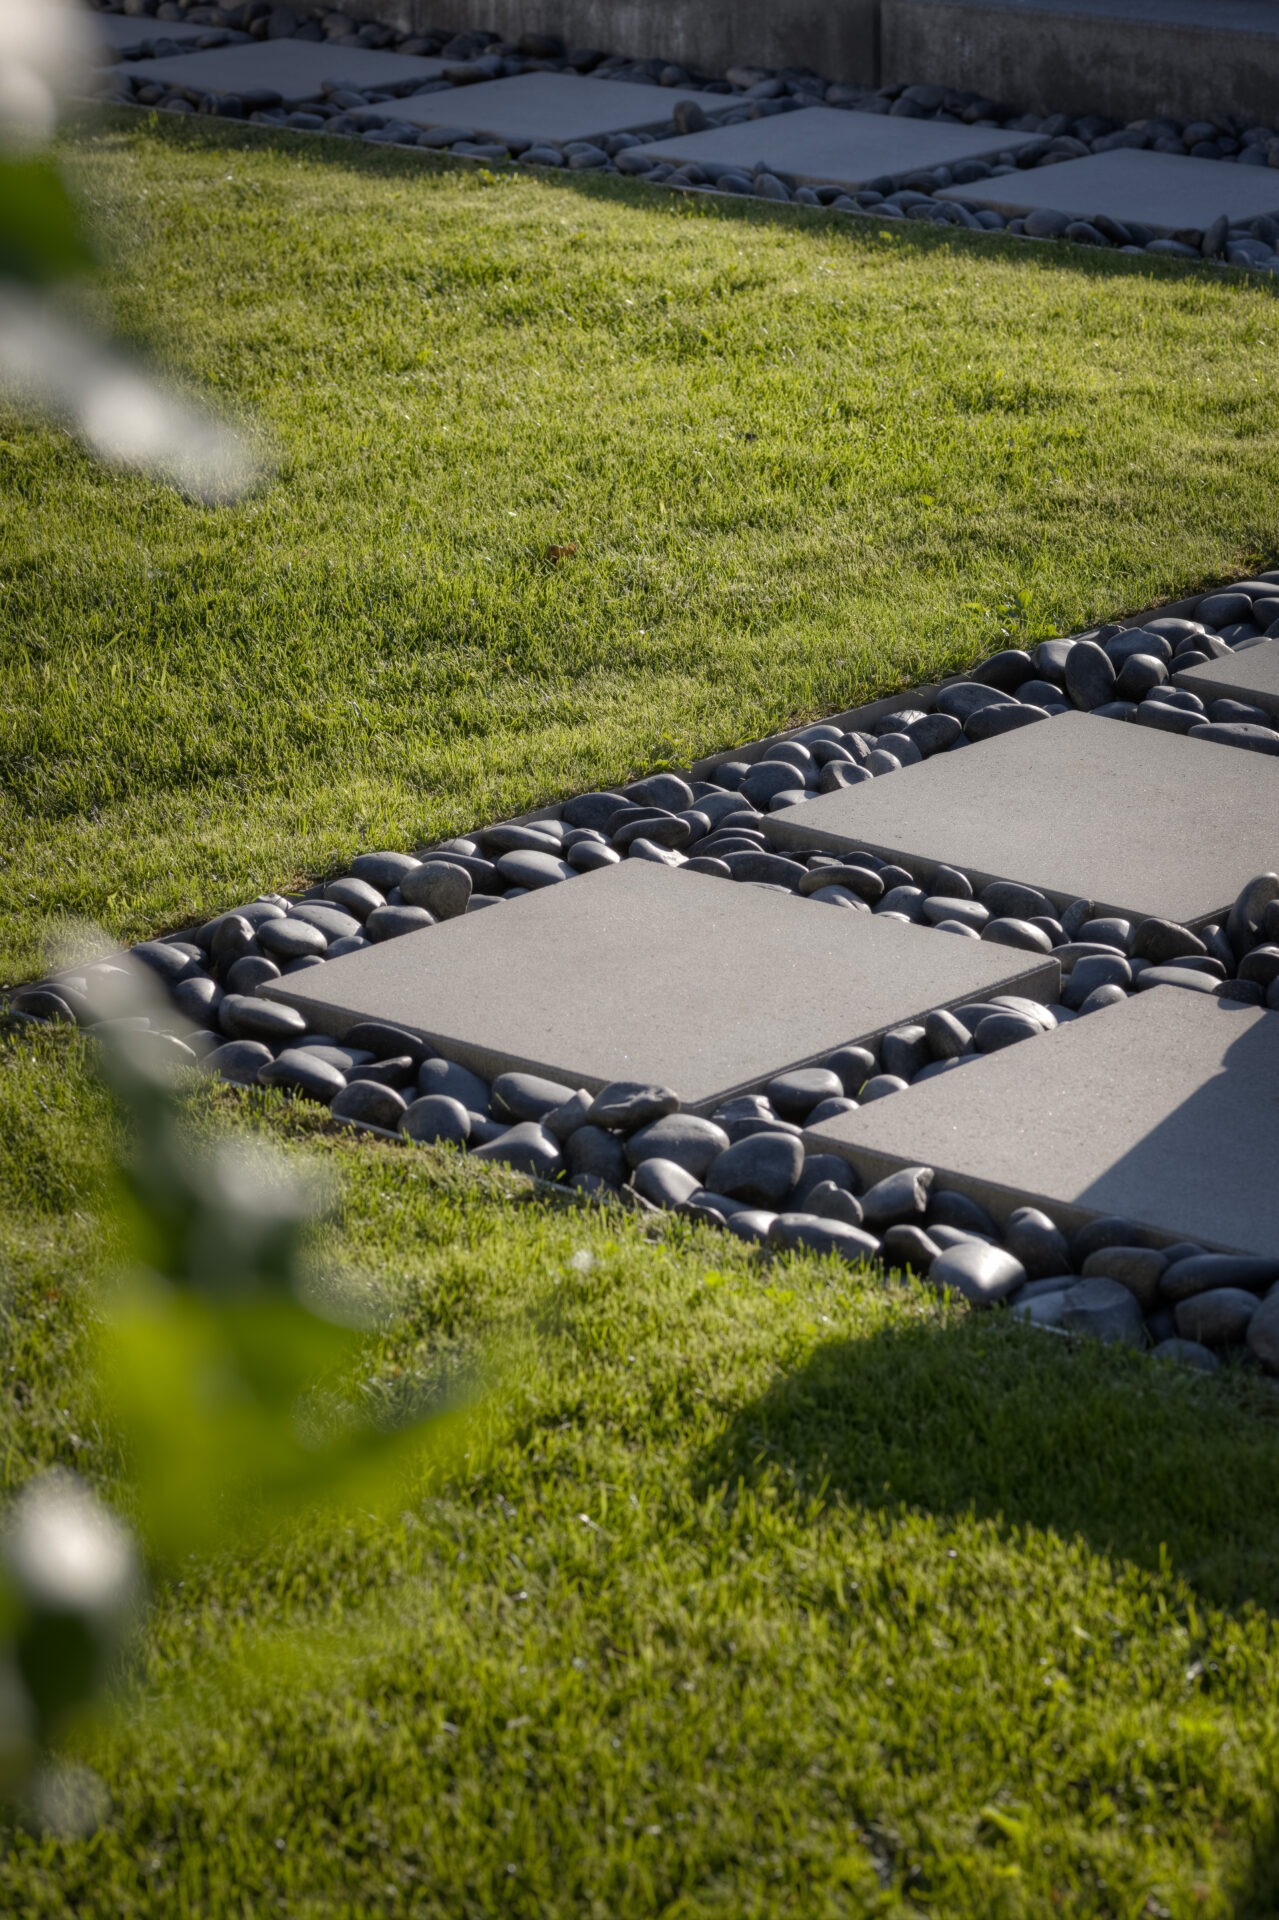 A landscaped garden featuring patterned stepping stones surrounded by smooth pebbles and lush green grass, implying a serene and meticulously designed outdoor space.